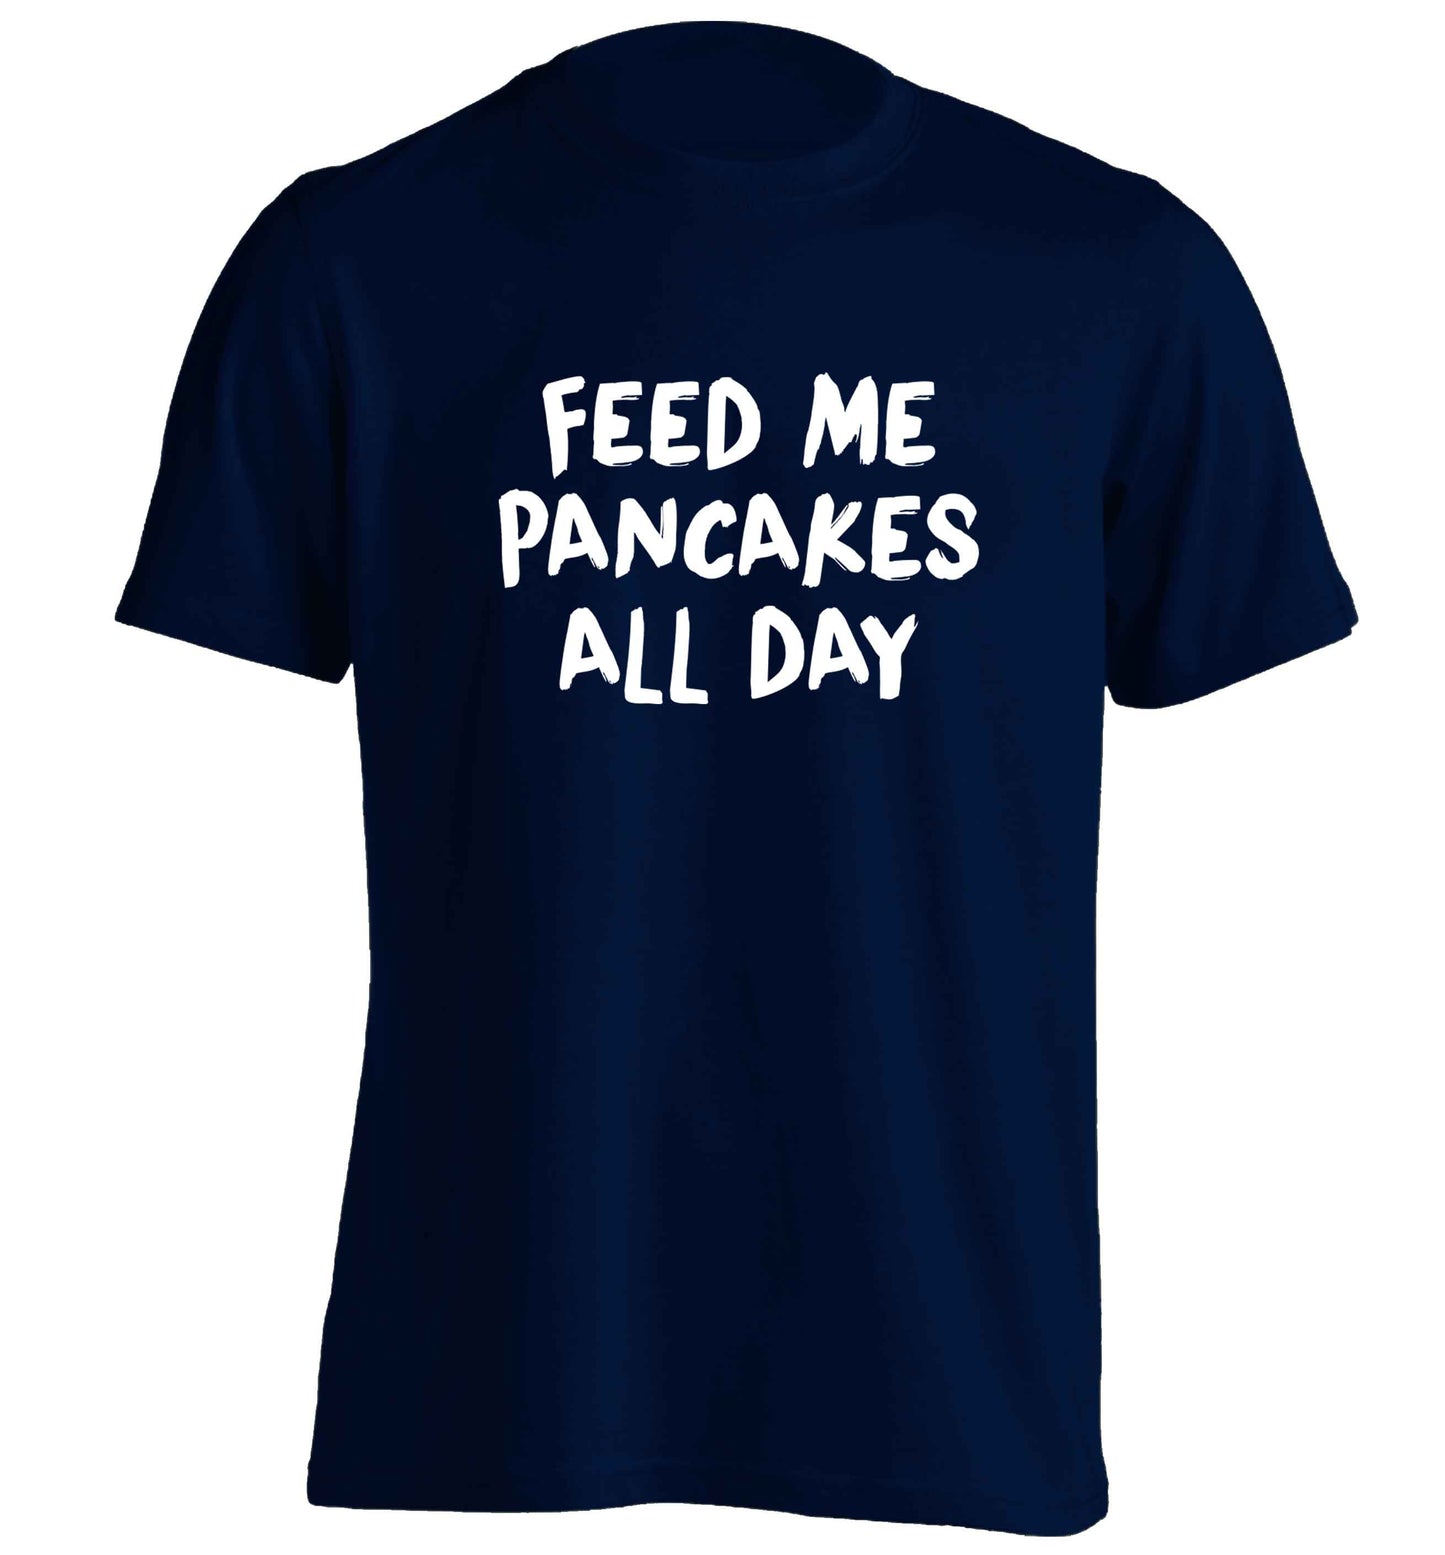 Feed me pancakes all day adults unisex navy Tshirt 2XL